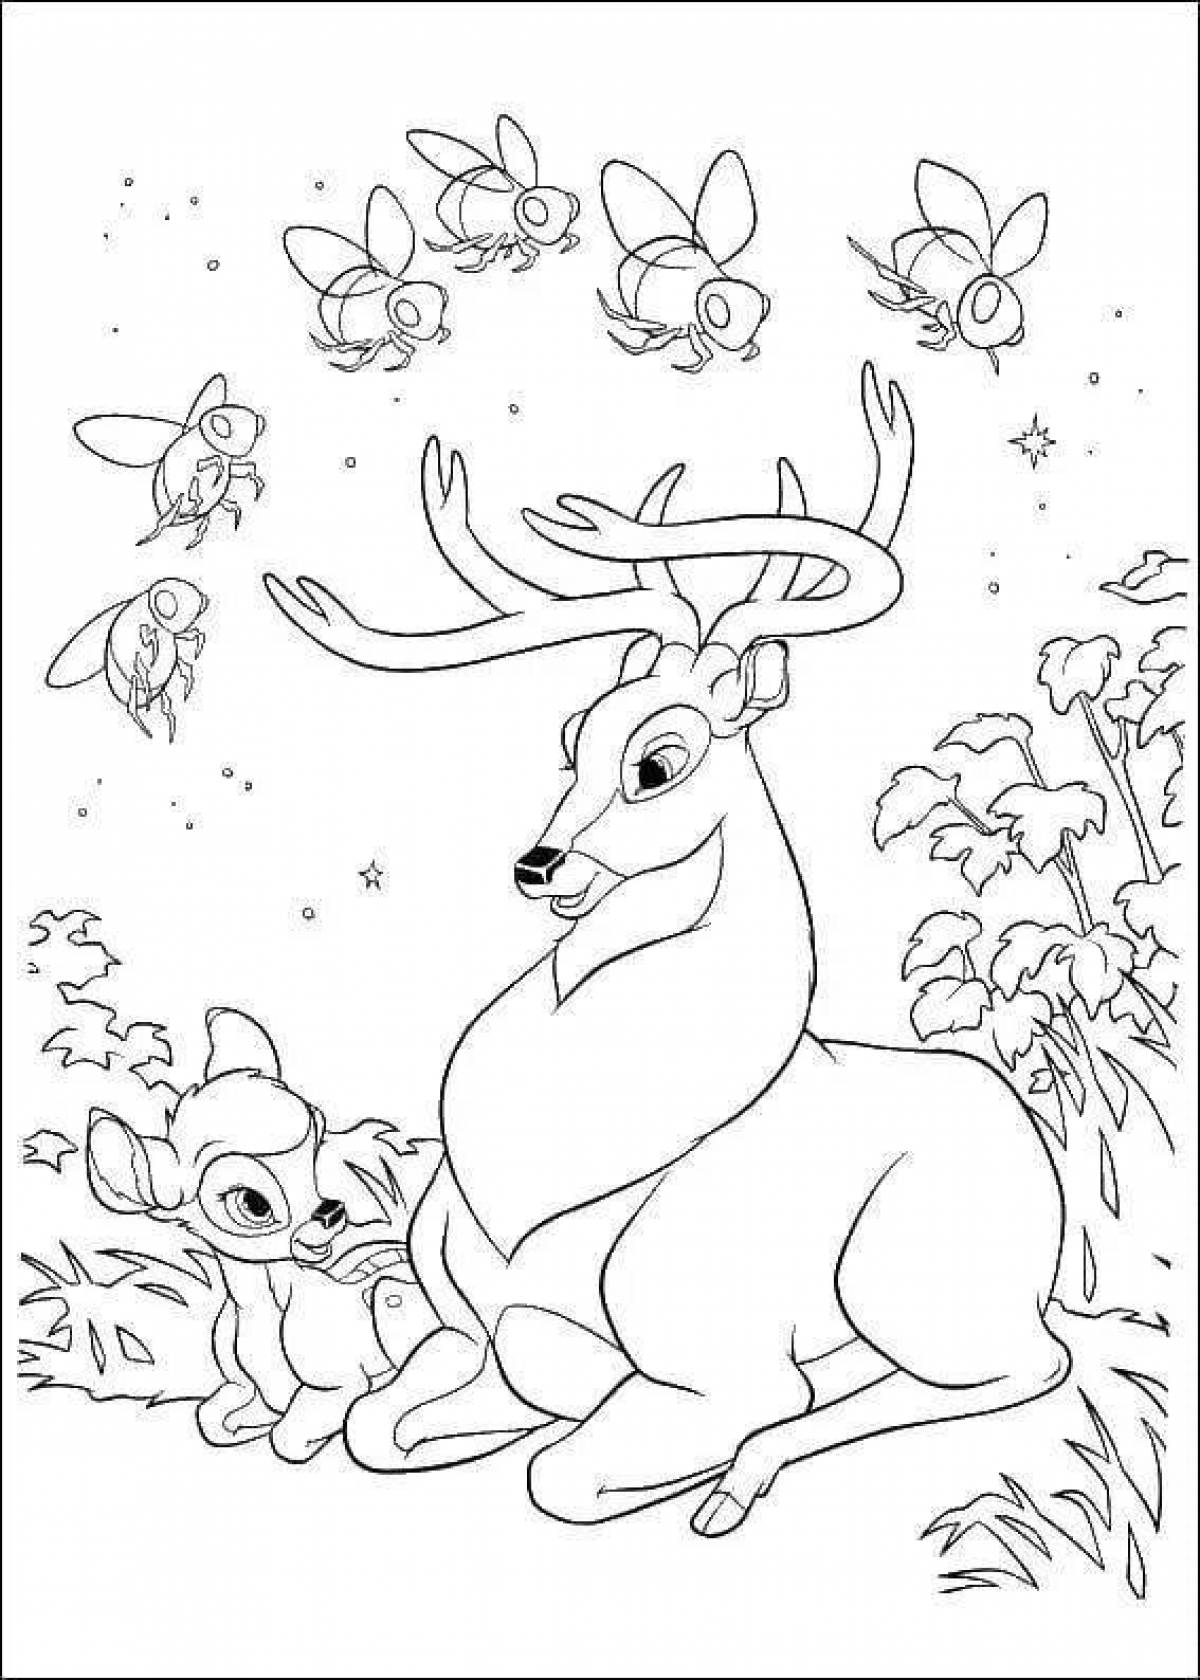 Coloring page sweet bambi fawn